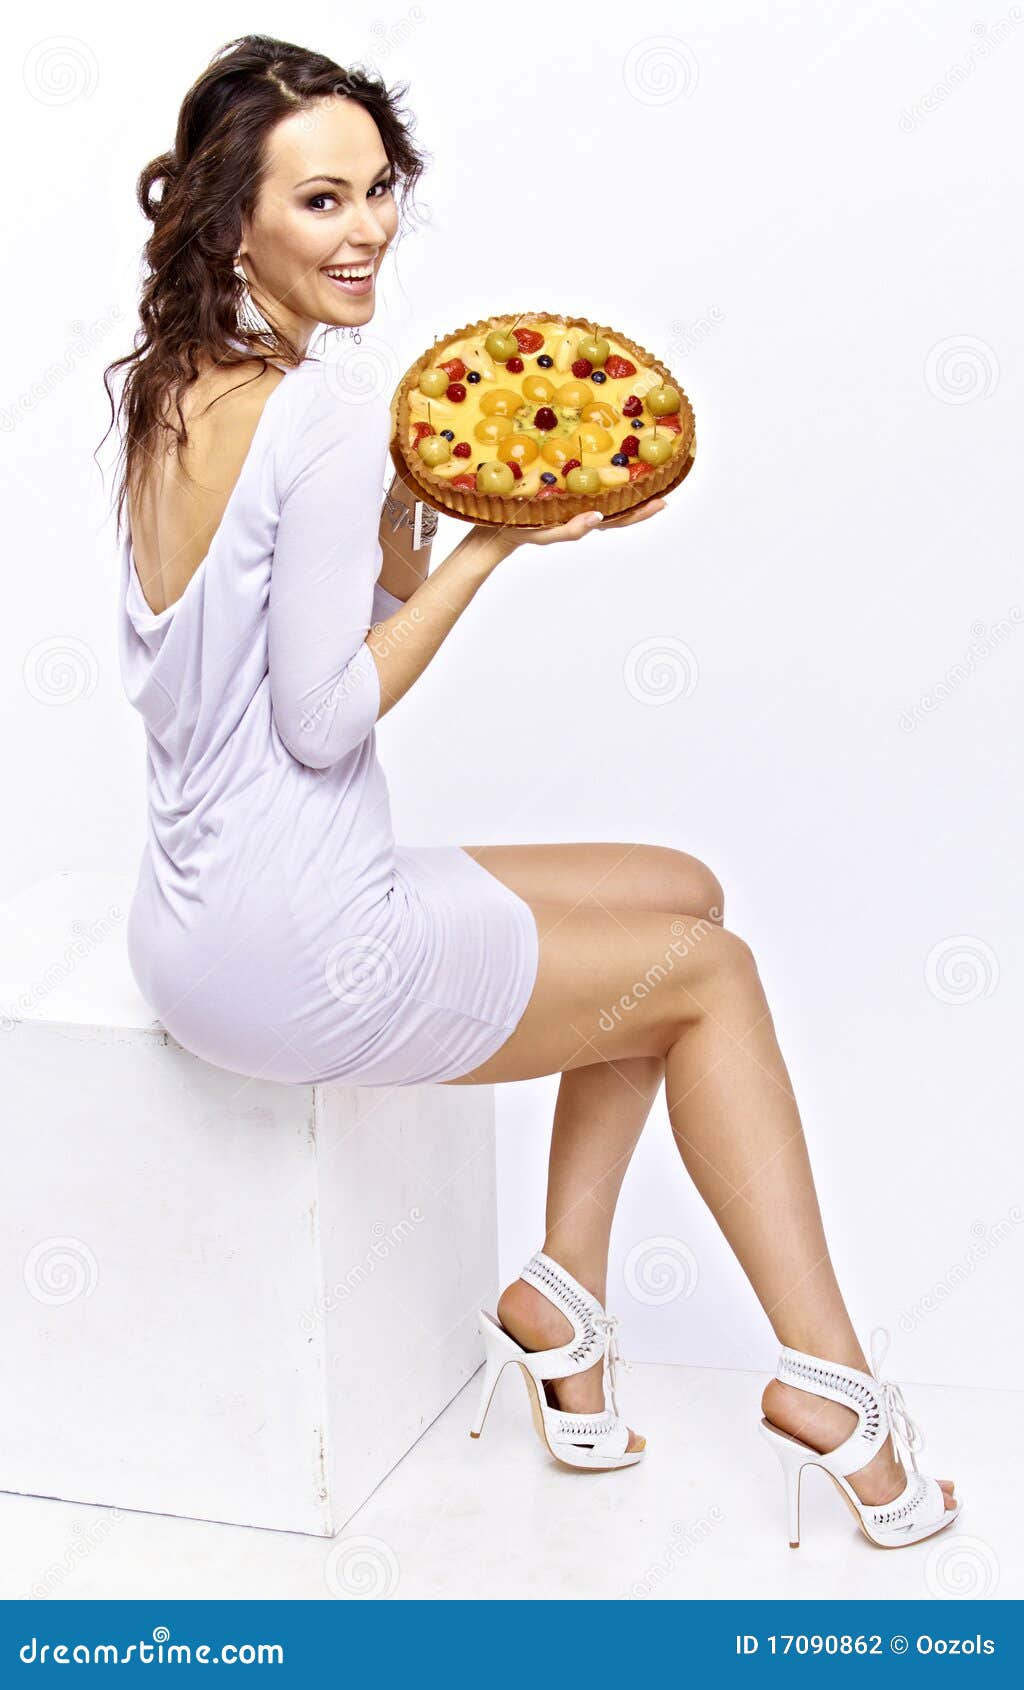 girl with a pie